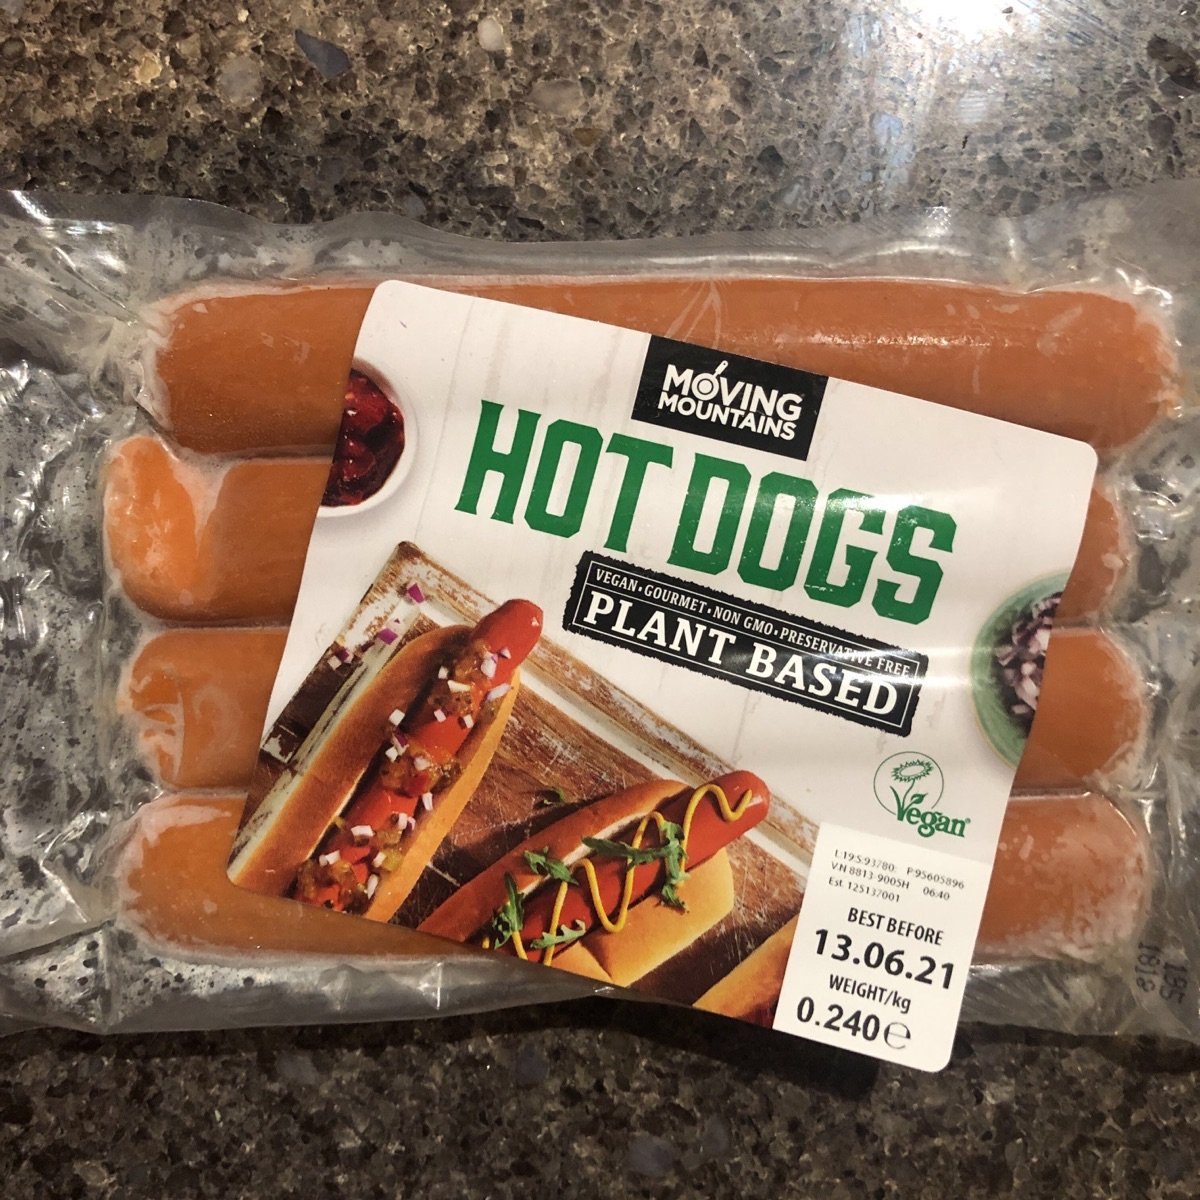 Moving Mountains Hot Dog Reviews | abillion